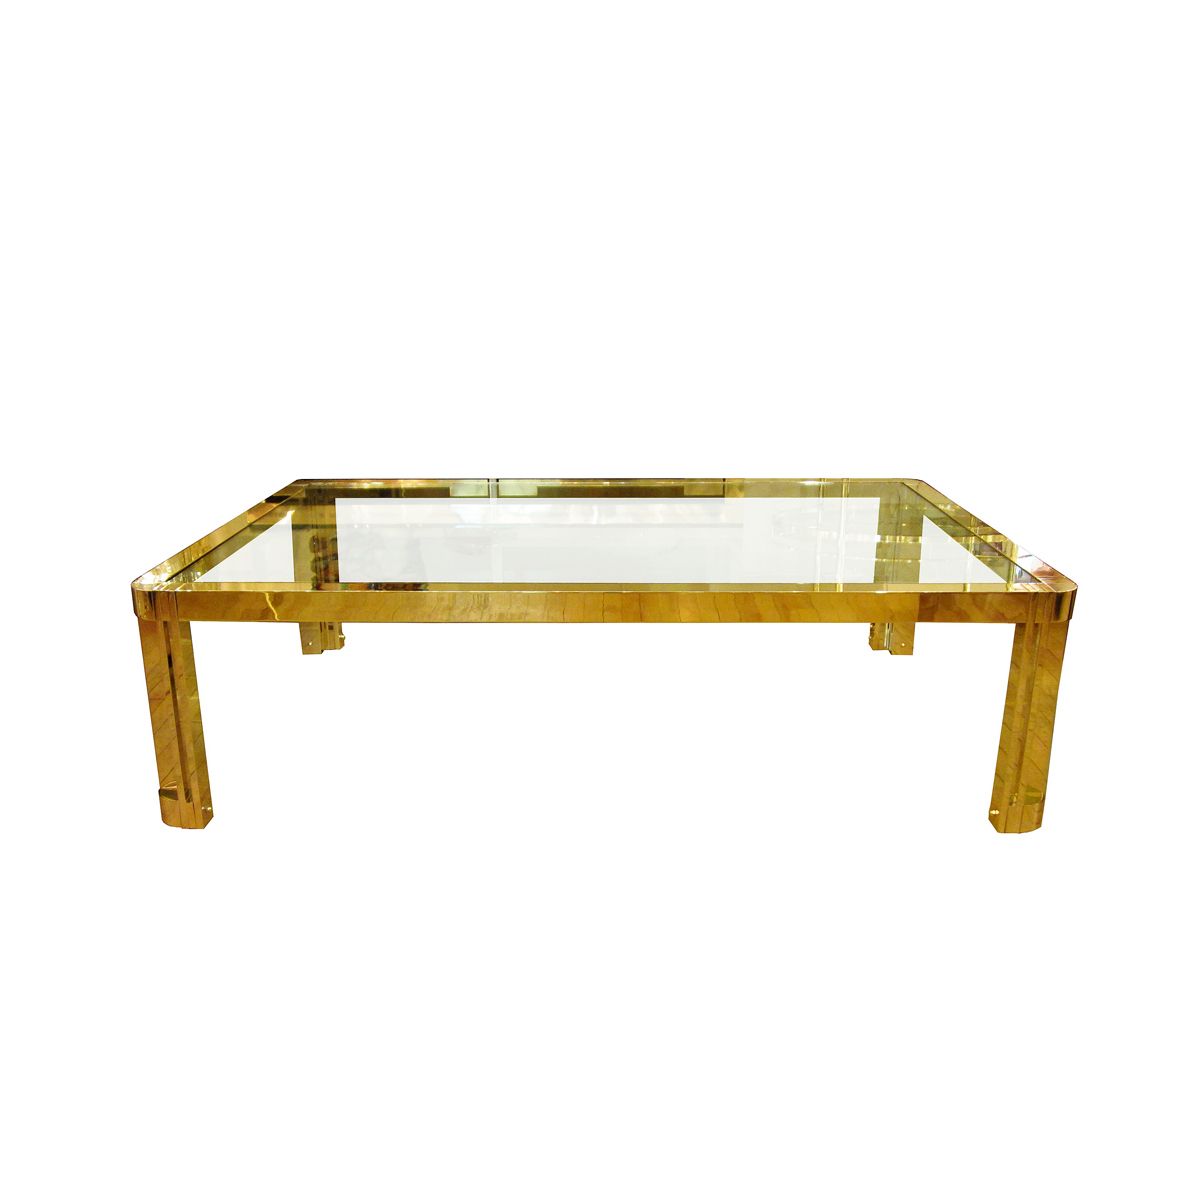 2019 Rectangular Glass Top Coffee Tables In Large Rectangular Brass And Glass Coffee Table With (View 18 of 20)